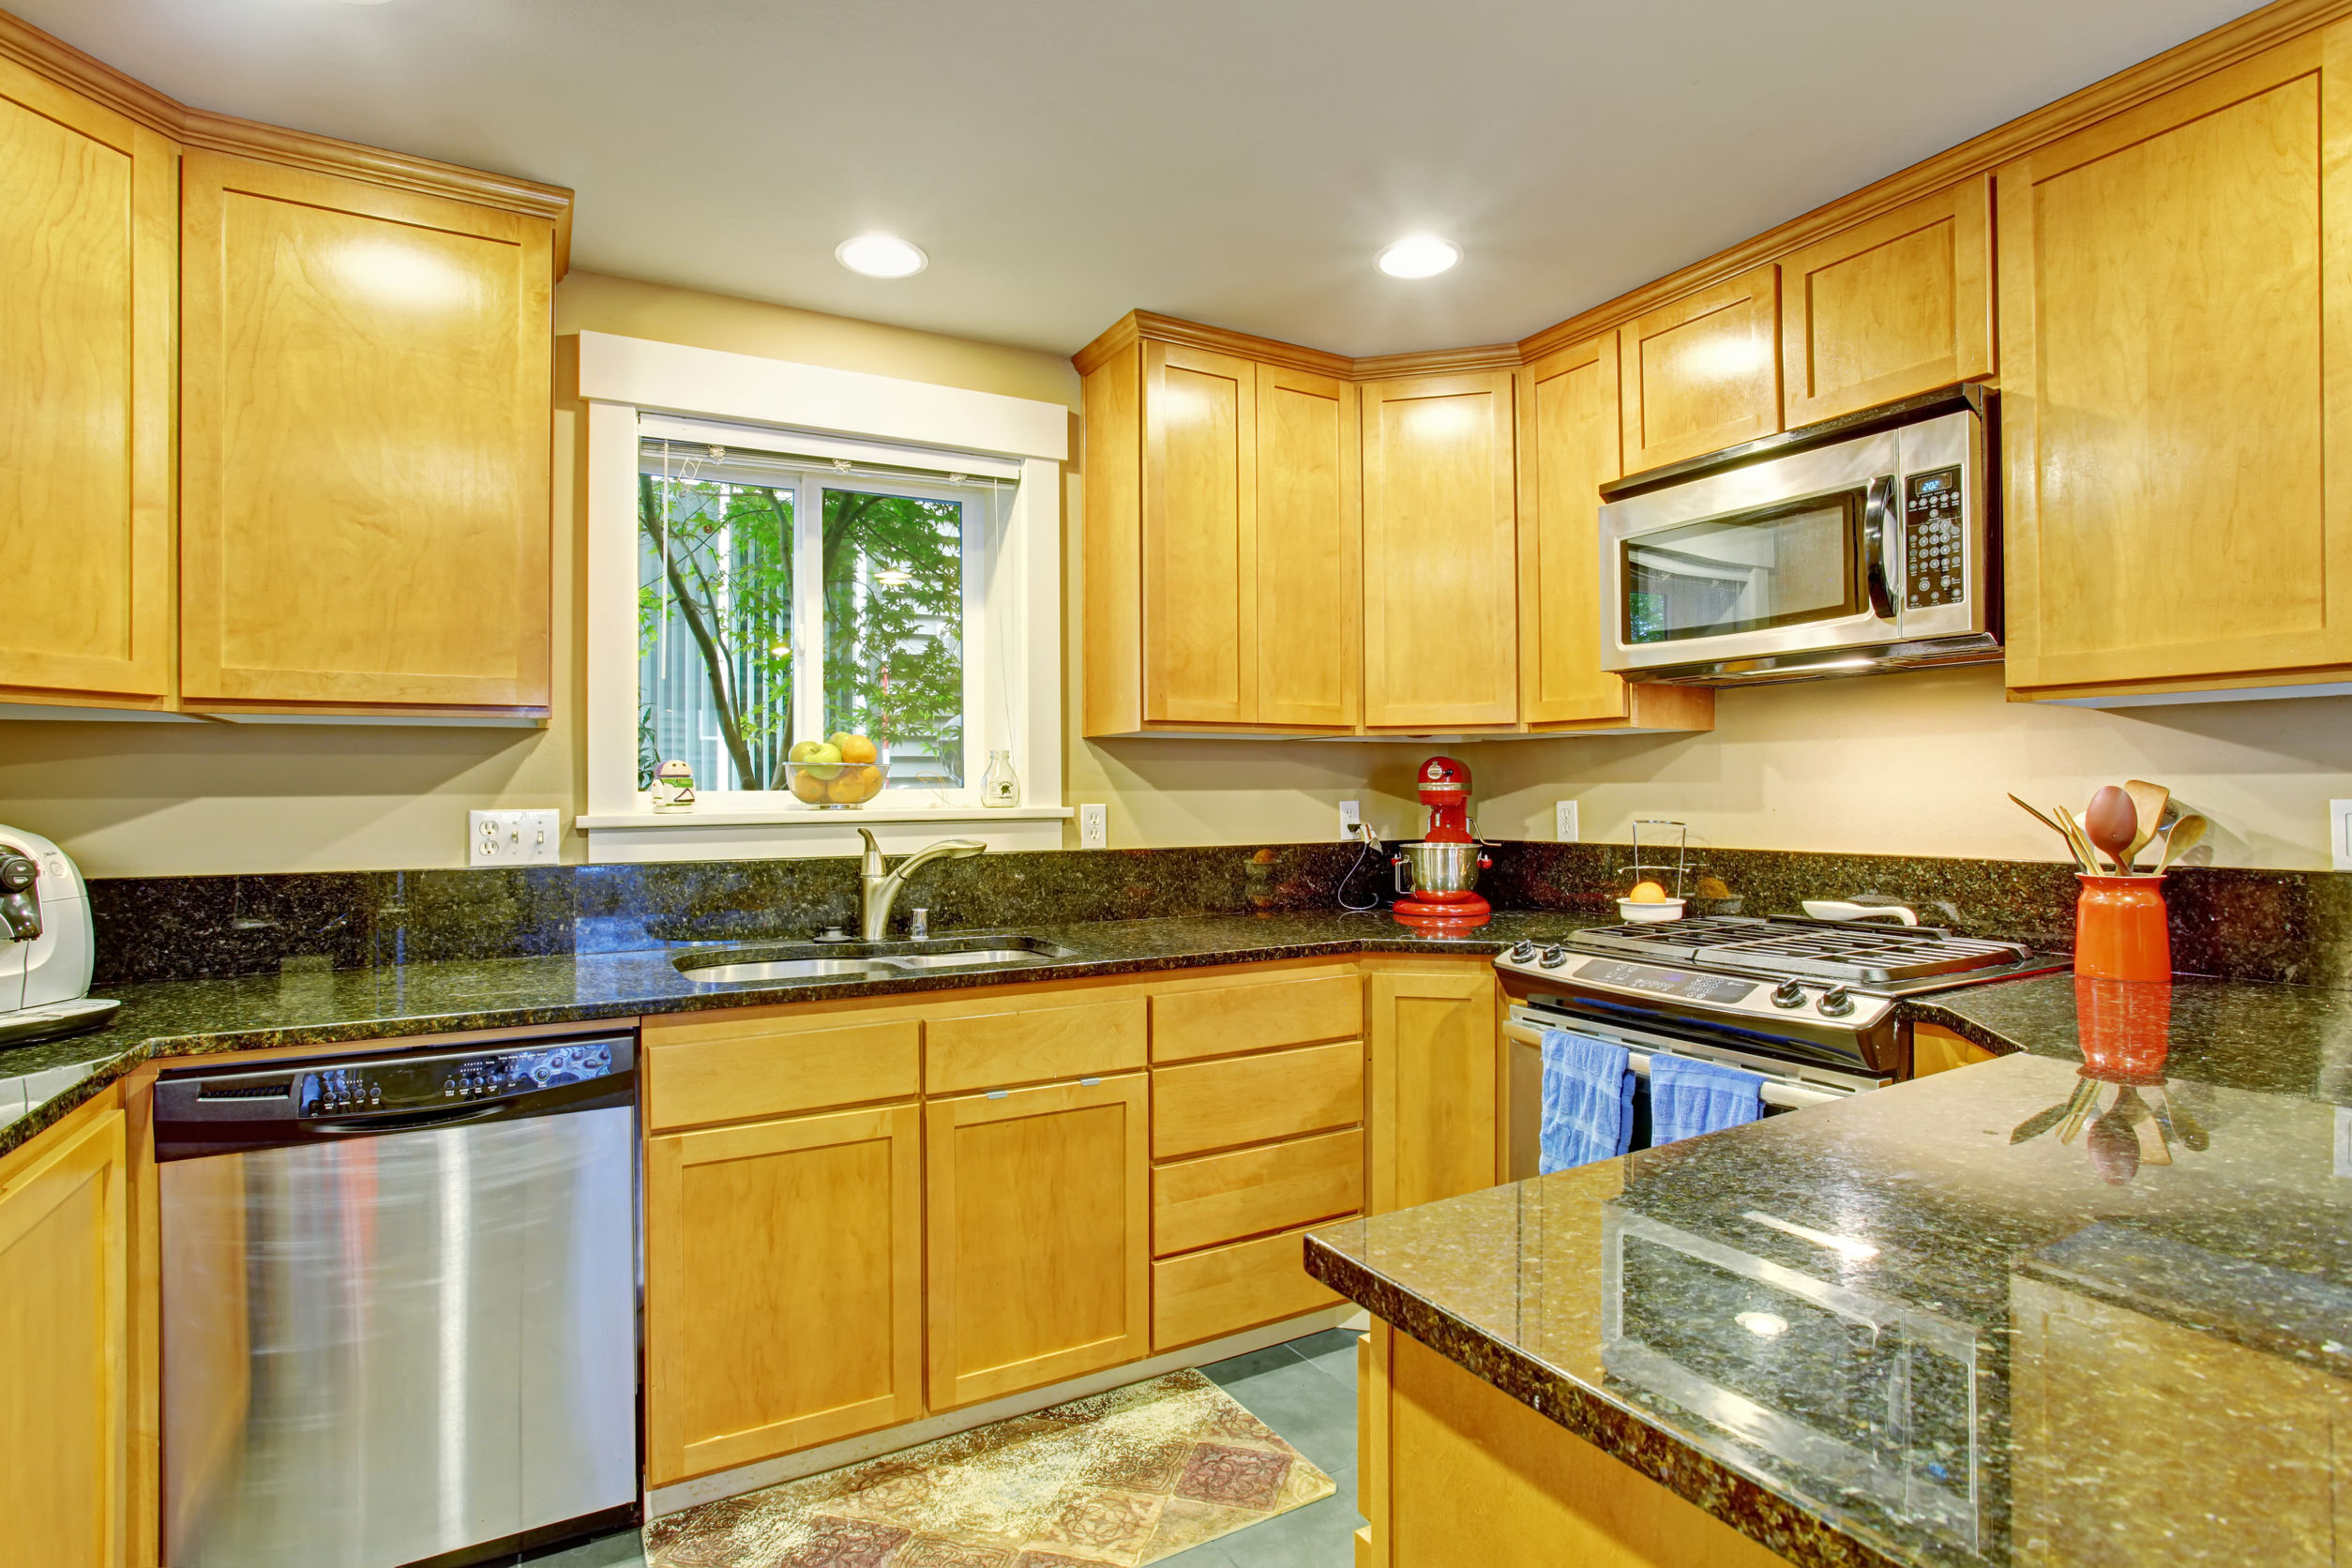 How to Get the Best Kitchen Lighting in Fort Wayne, Indiana